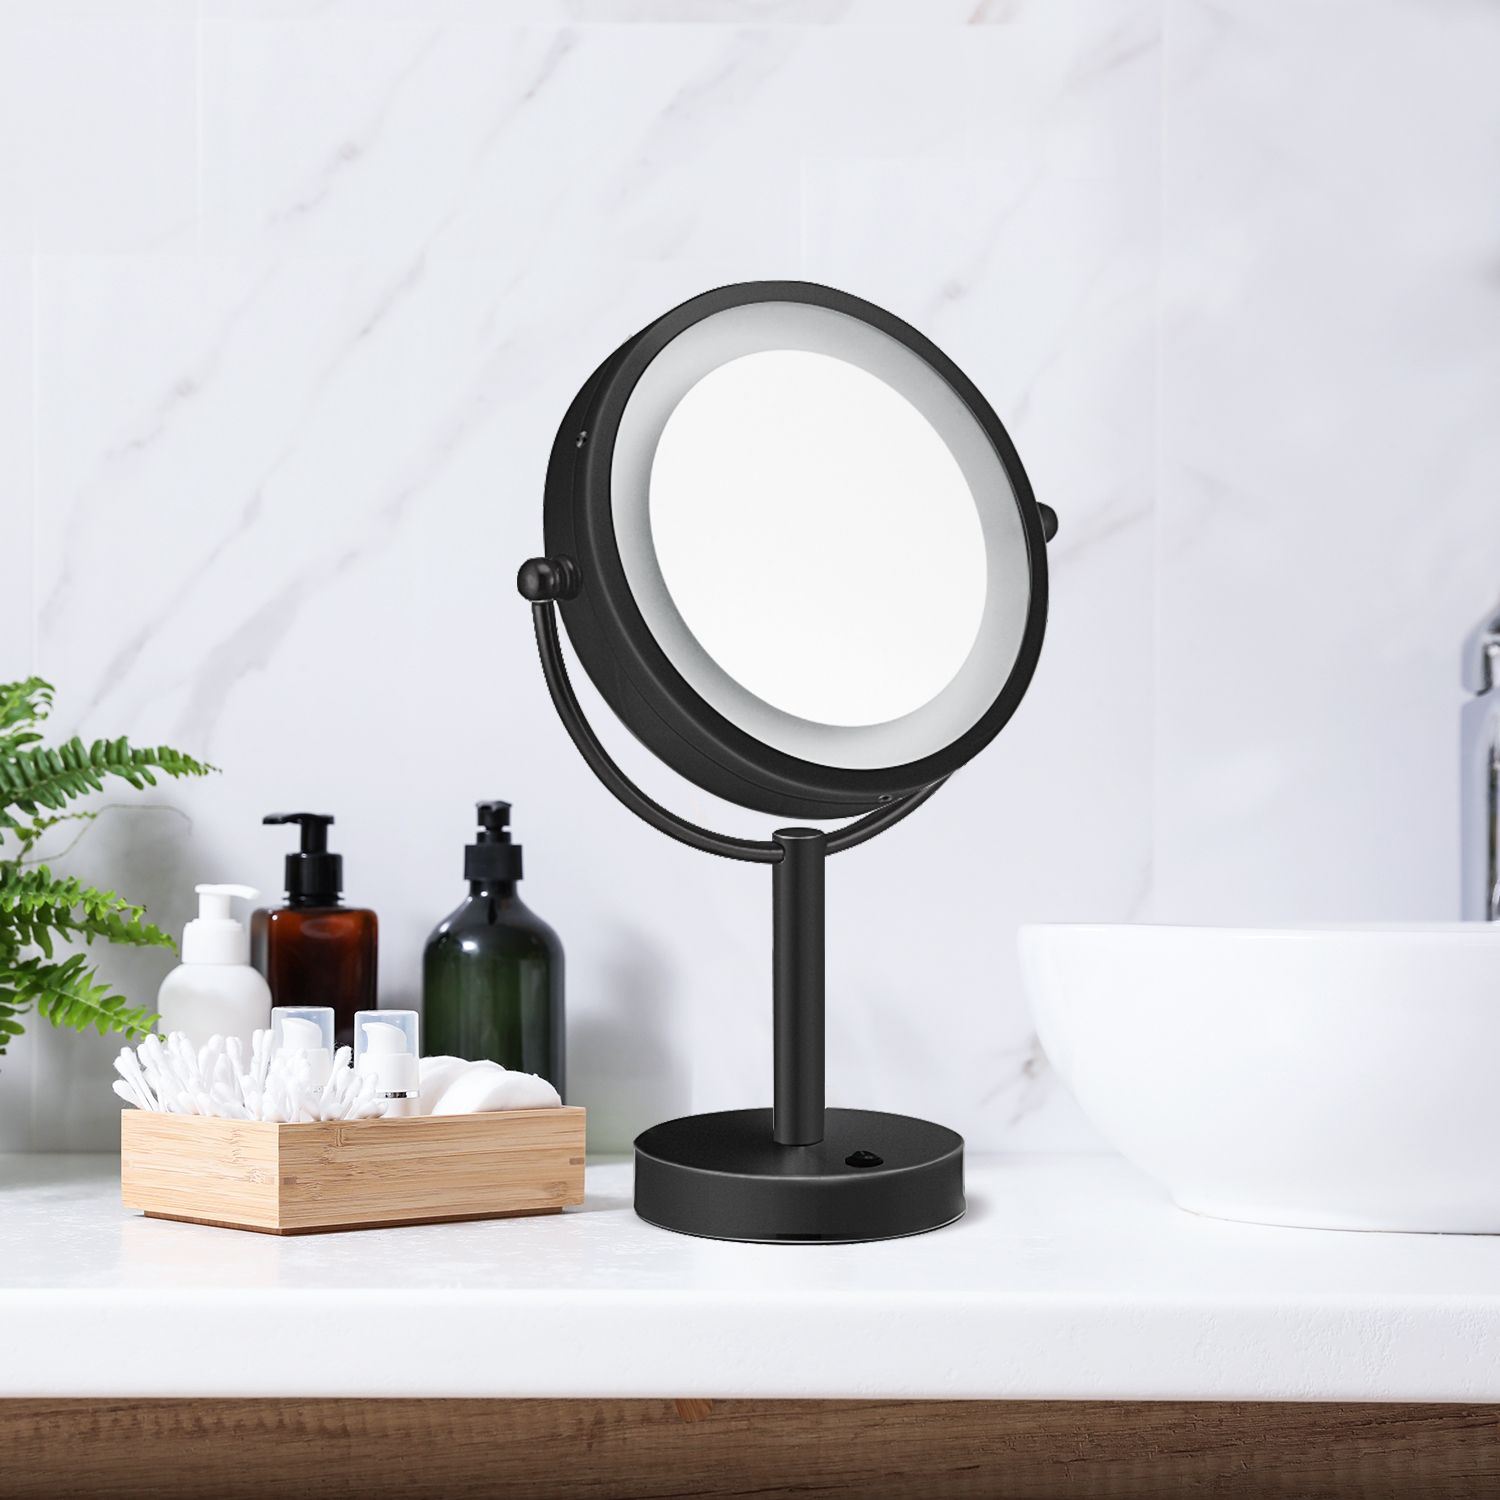 ICO Bath V9015 8.5" Double Sided Lighted Free-Standing Mirror - Matte Black